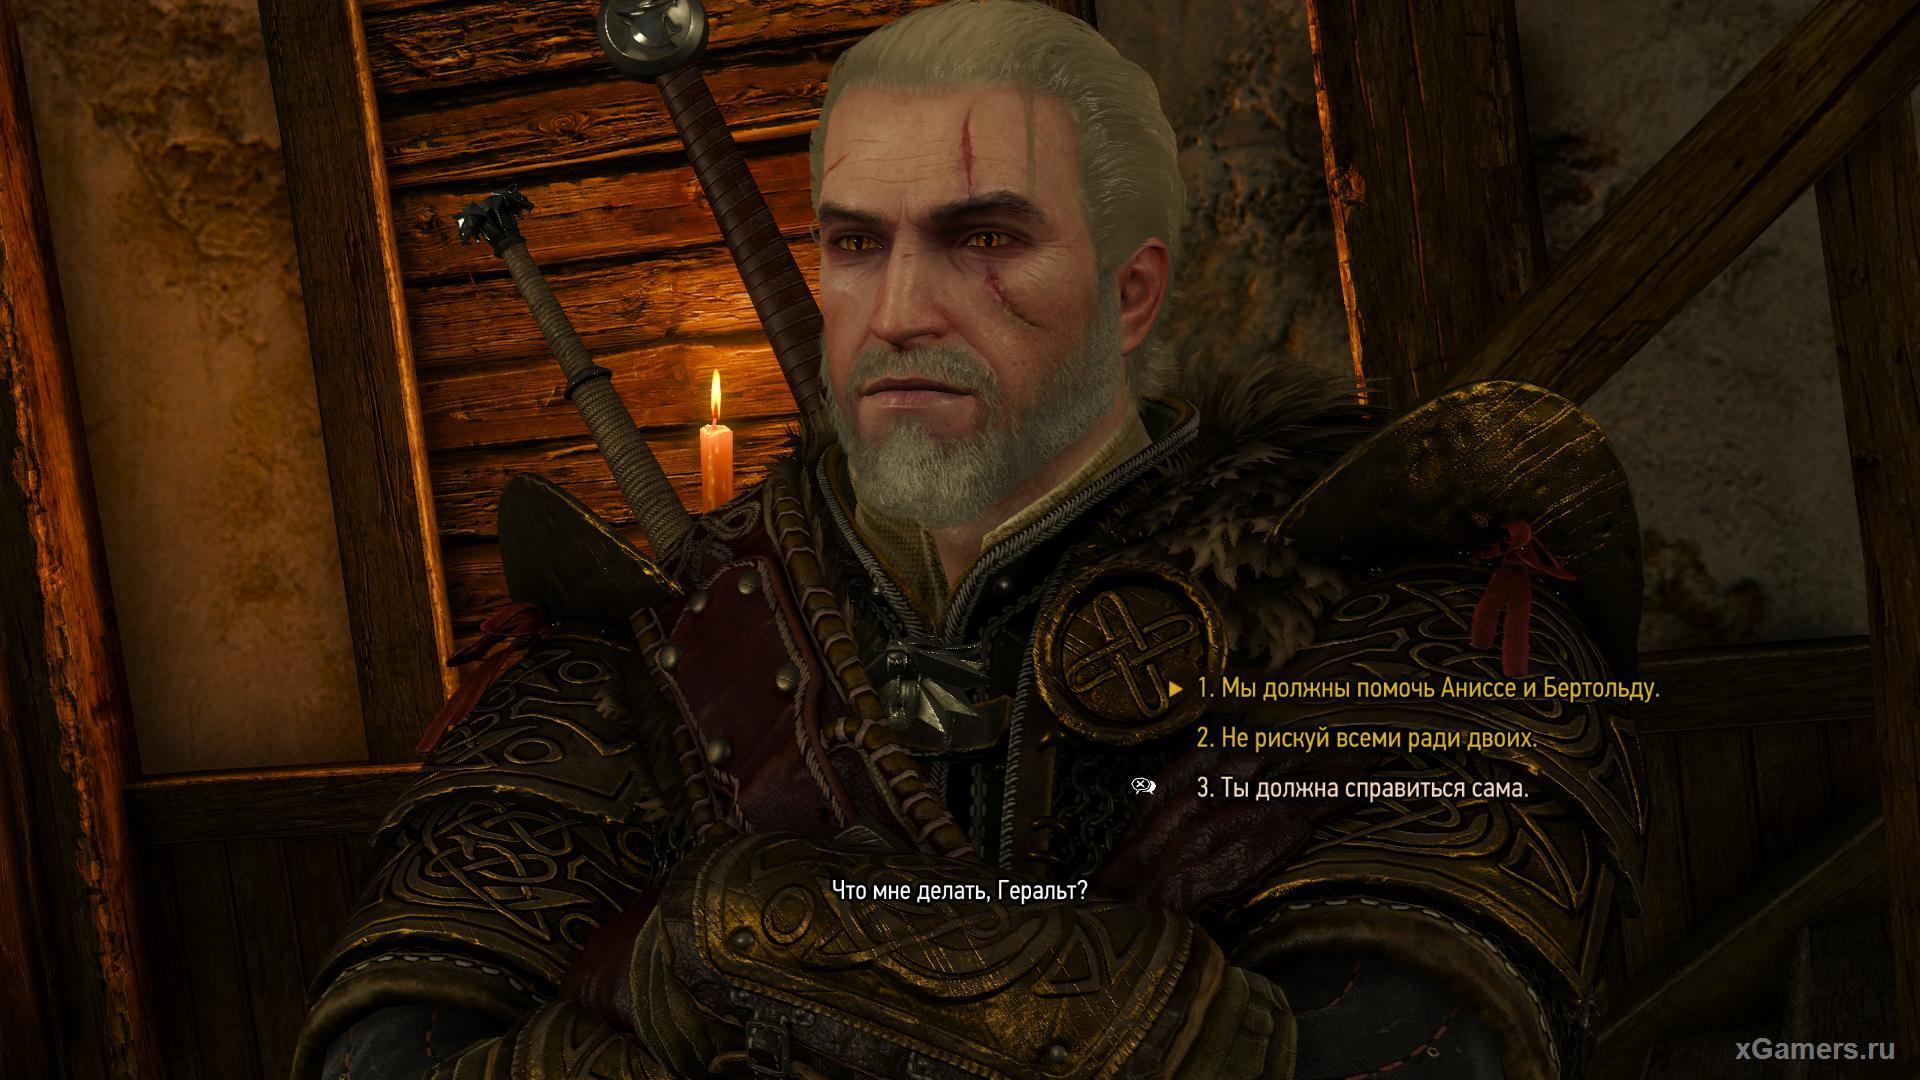 Quest Now or never in the game The Witcher 3